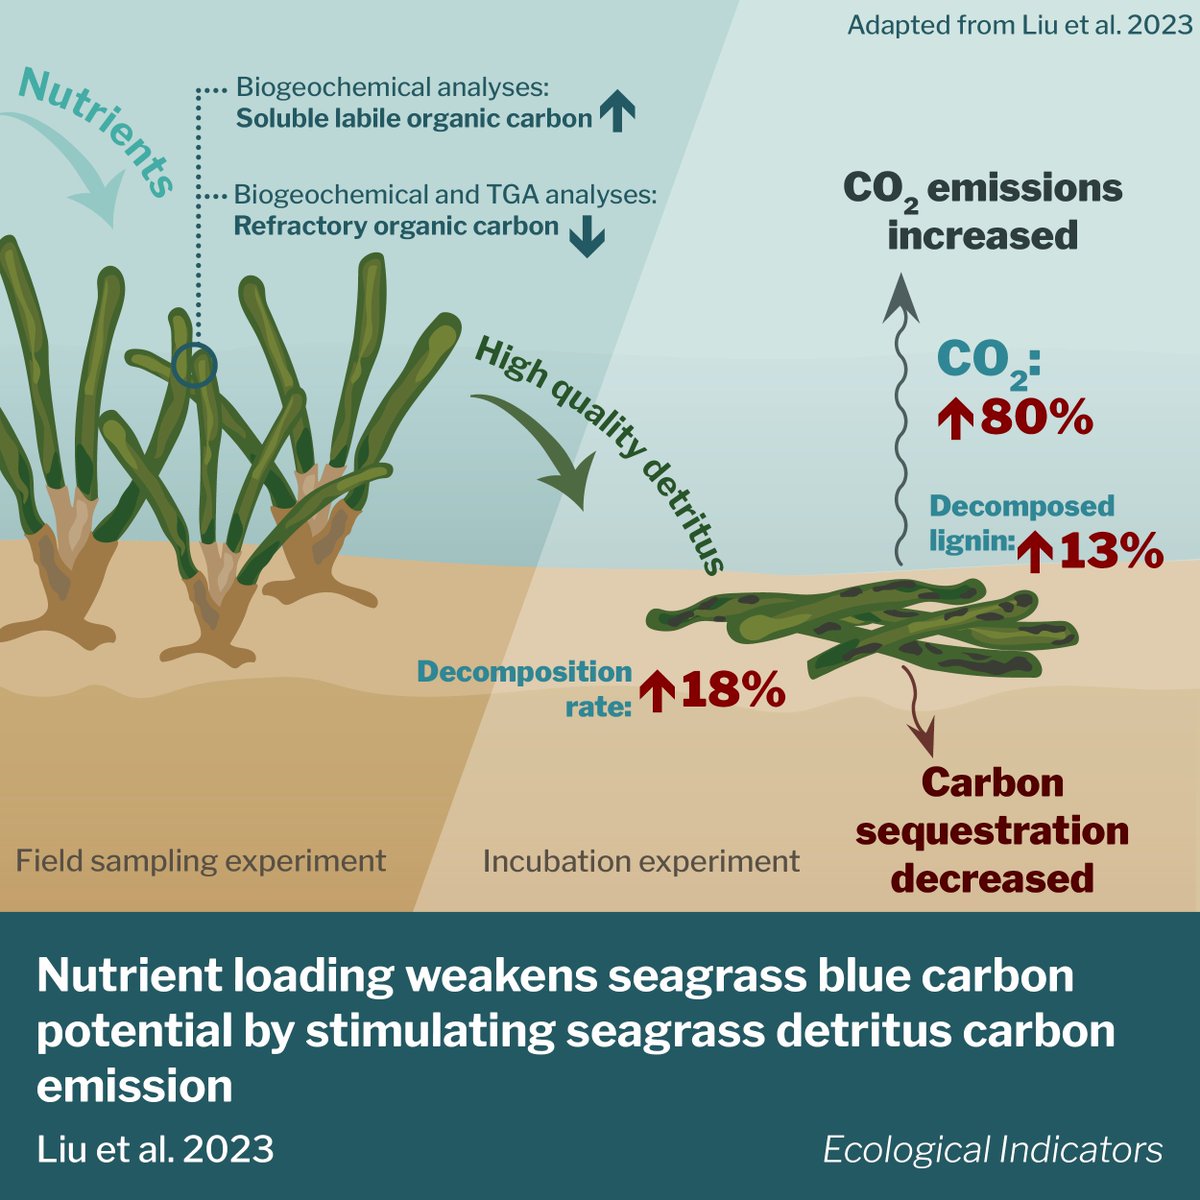 New paper shows how coastal nutrient pollution impacts seagrass #bluecarbon storage by speeding up decomposition & increasing CO2 emissions. Managing coastal nutrients is crucial to preserve the ability of seagrass meadows to act as carbon sinks. doi.org/10.1016/j.ecol…